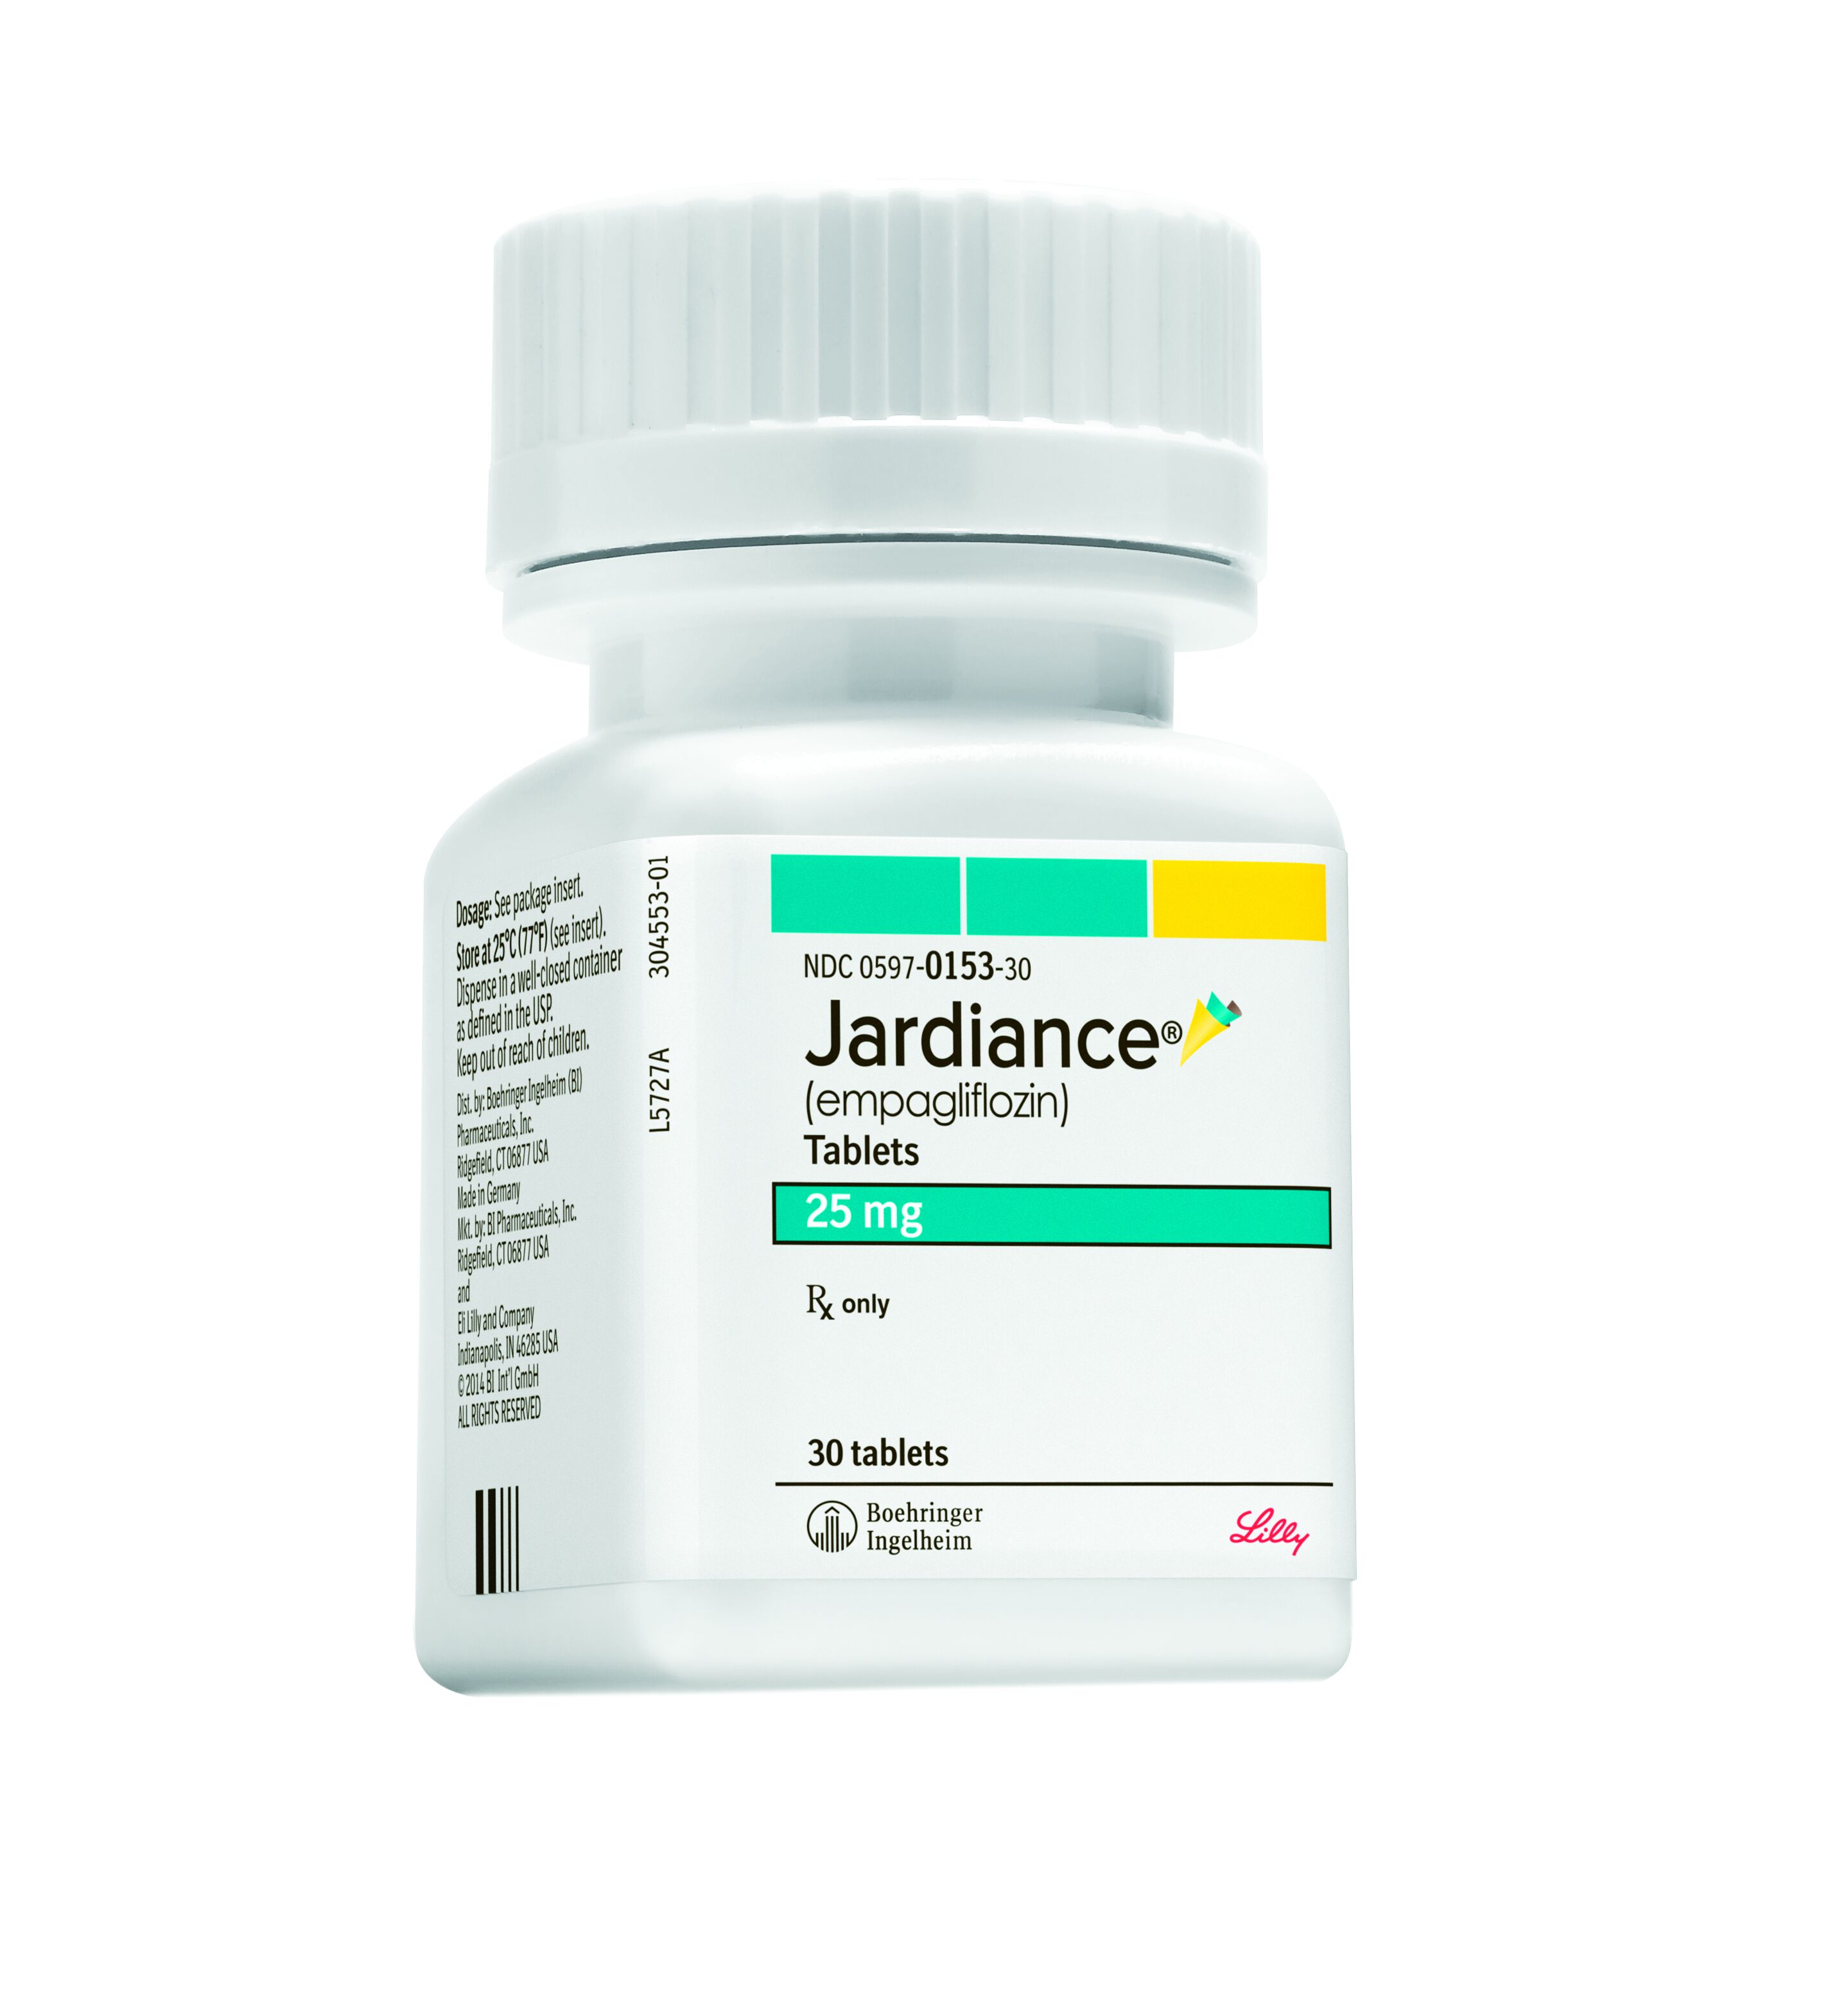 Jardiance: The Type 2 Diabetes Drug That Also Helps With Weight Loss